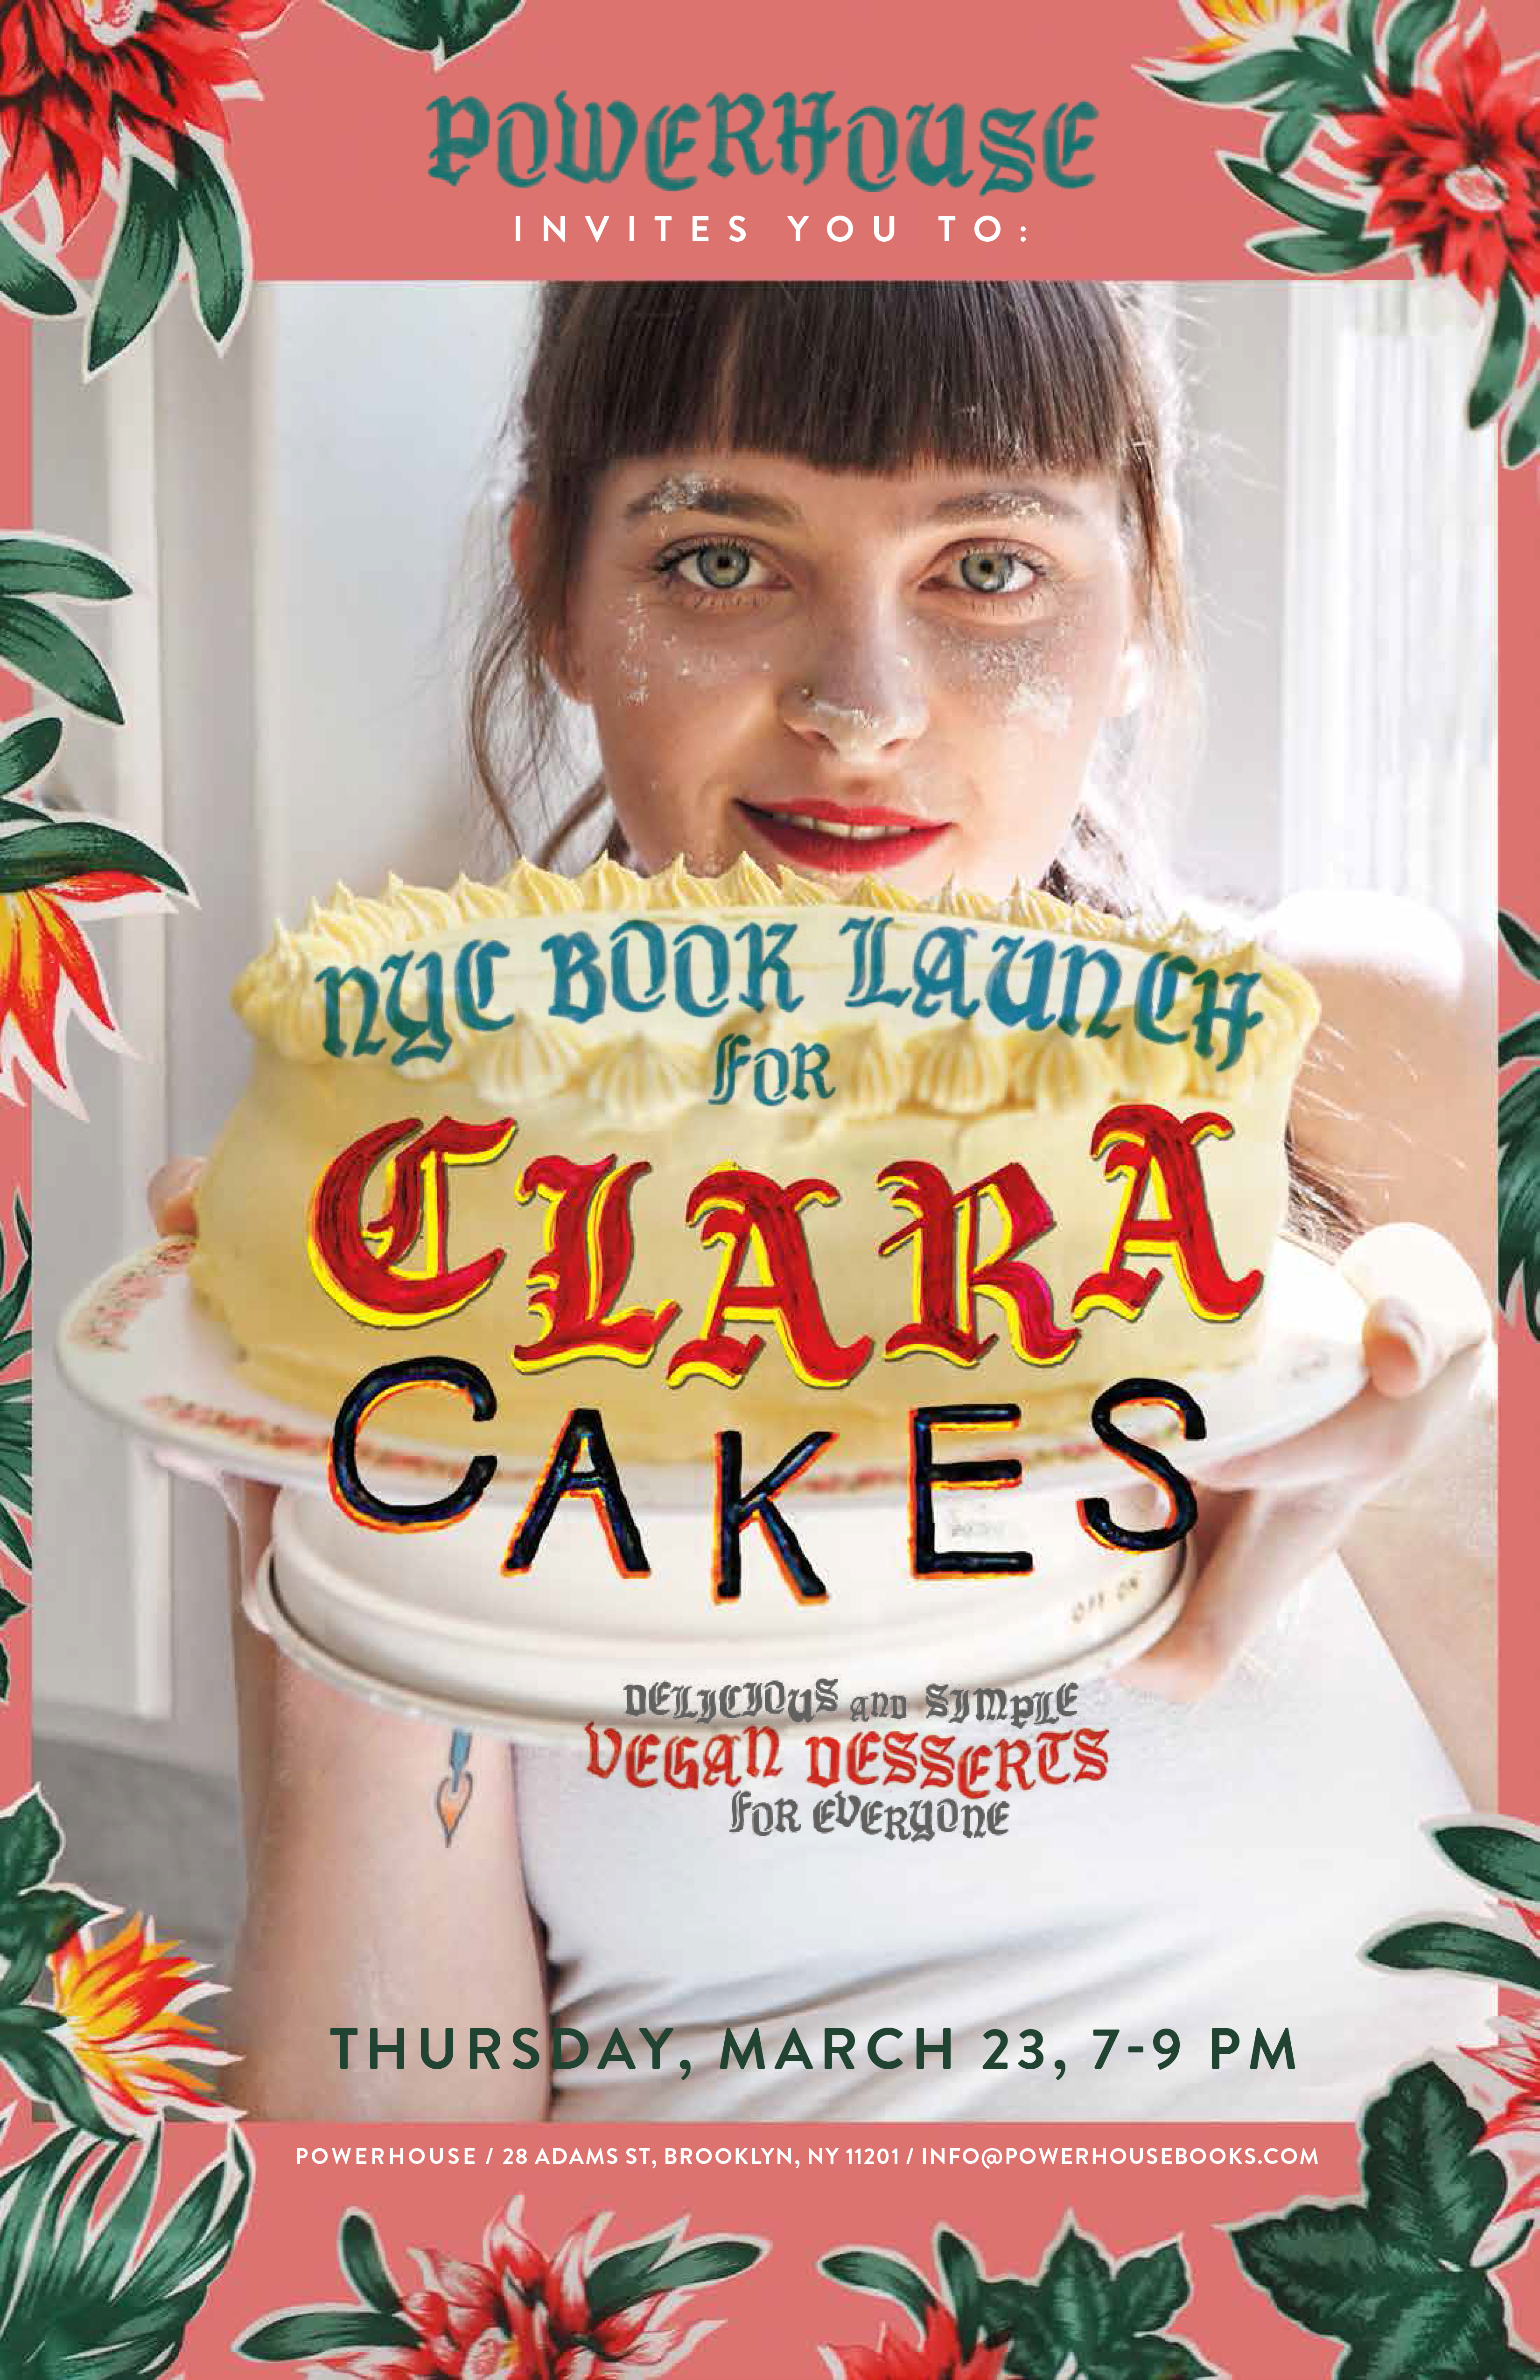 powerHouse Books Launch: Clara Cakes: Delicious and Simple Vegan Desserts for Everyone! by Clara Polito in conversation with Howie Kahn